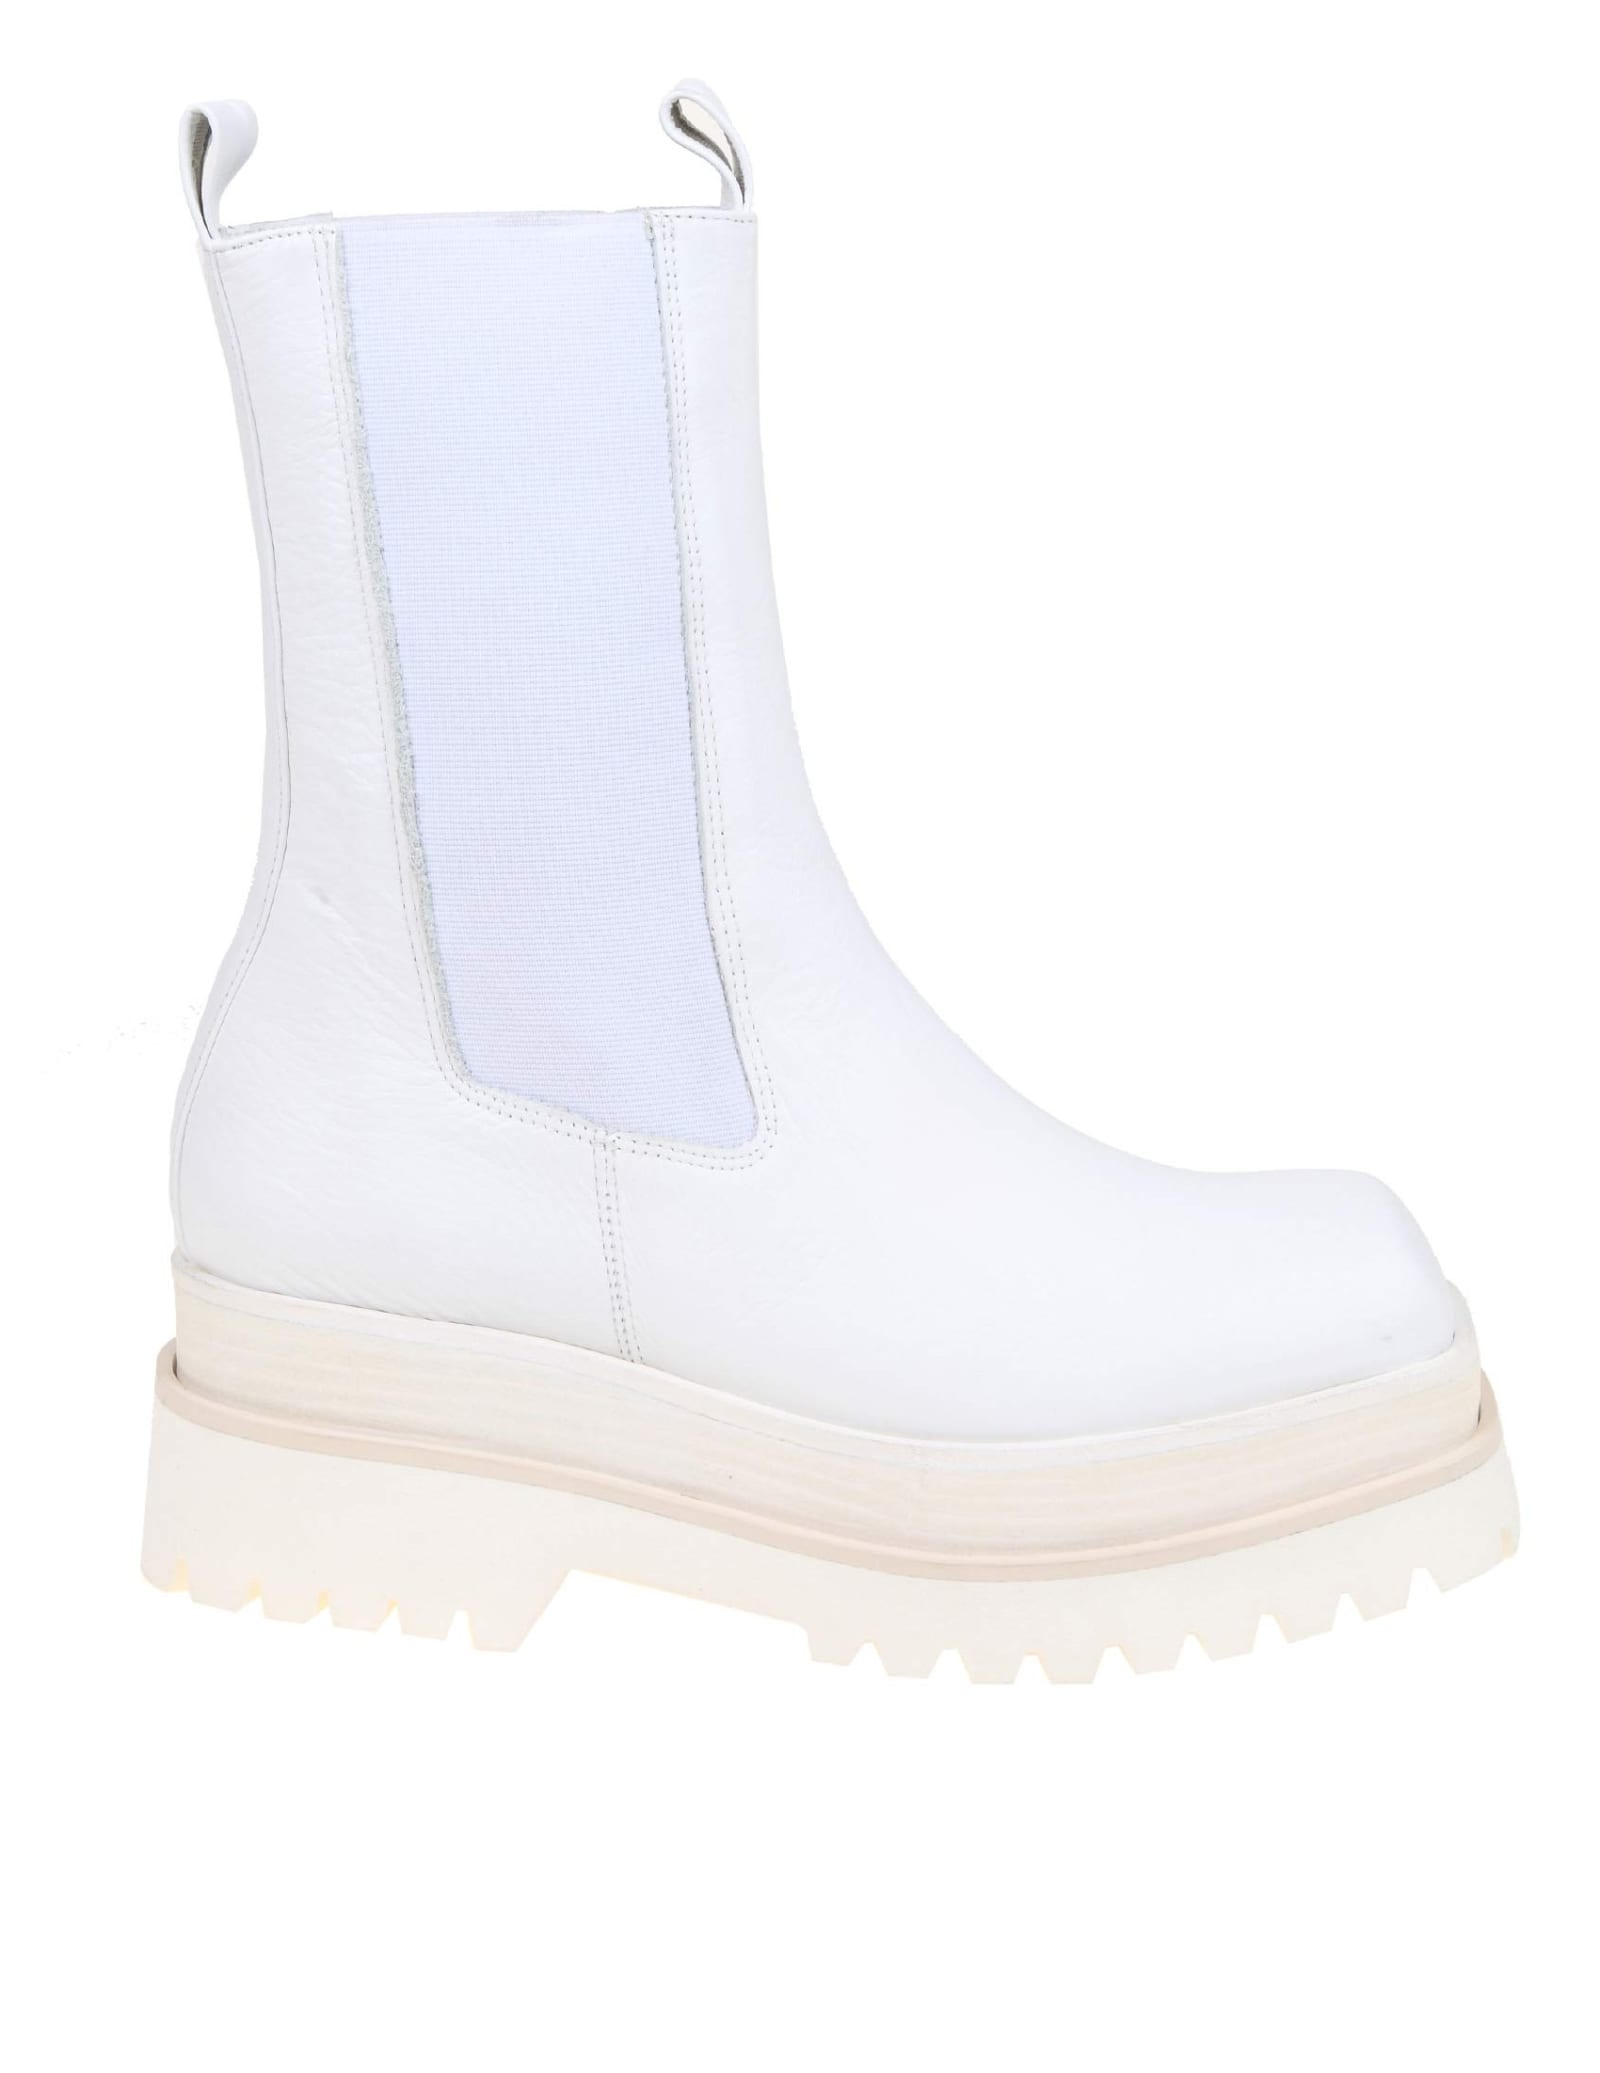 Paloma Barceló Paloma Barcelo danielle Ankle Boot In White Nappa